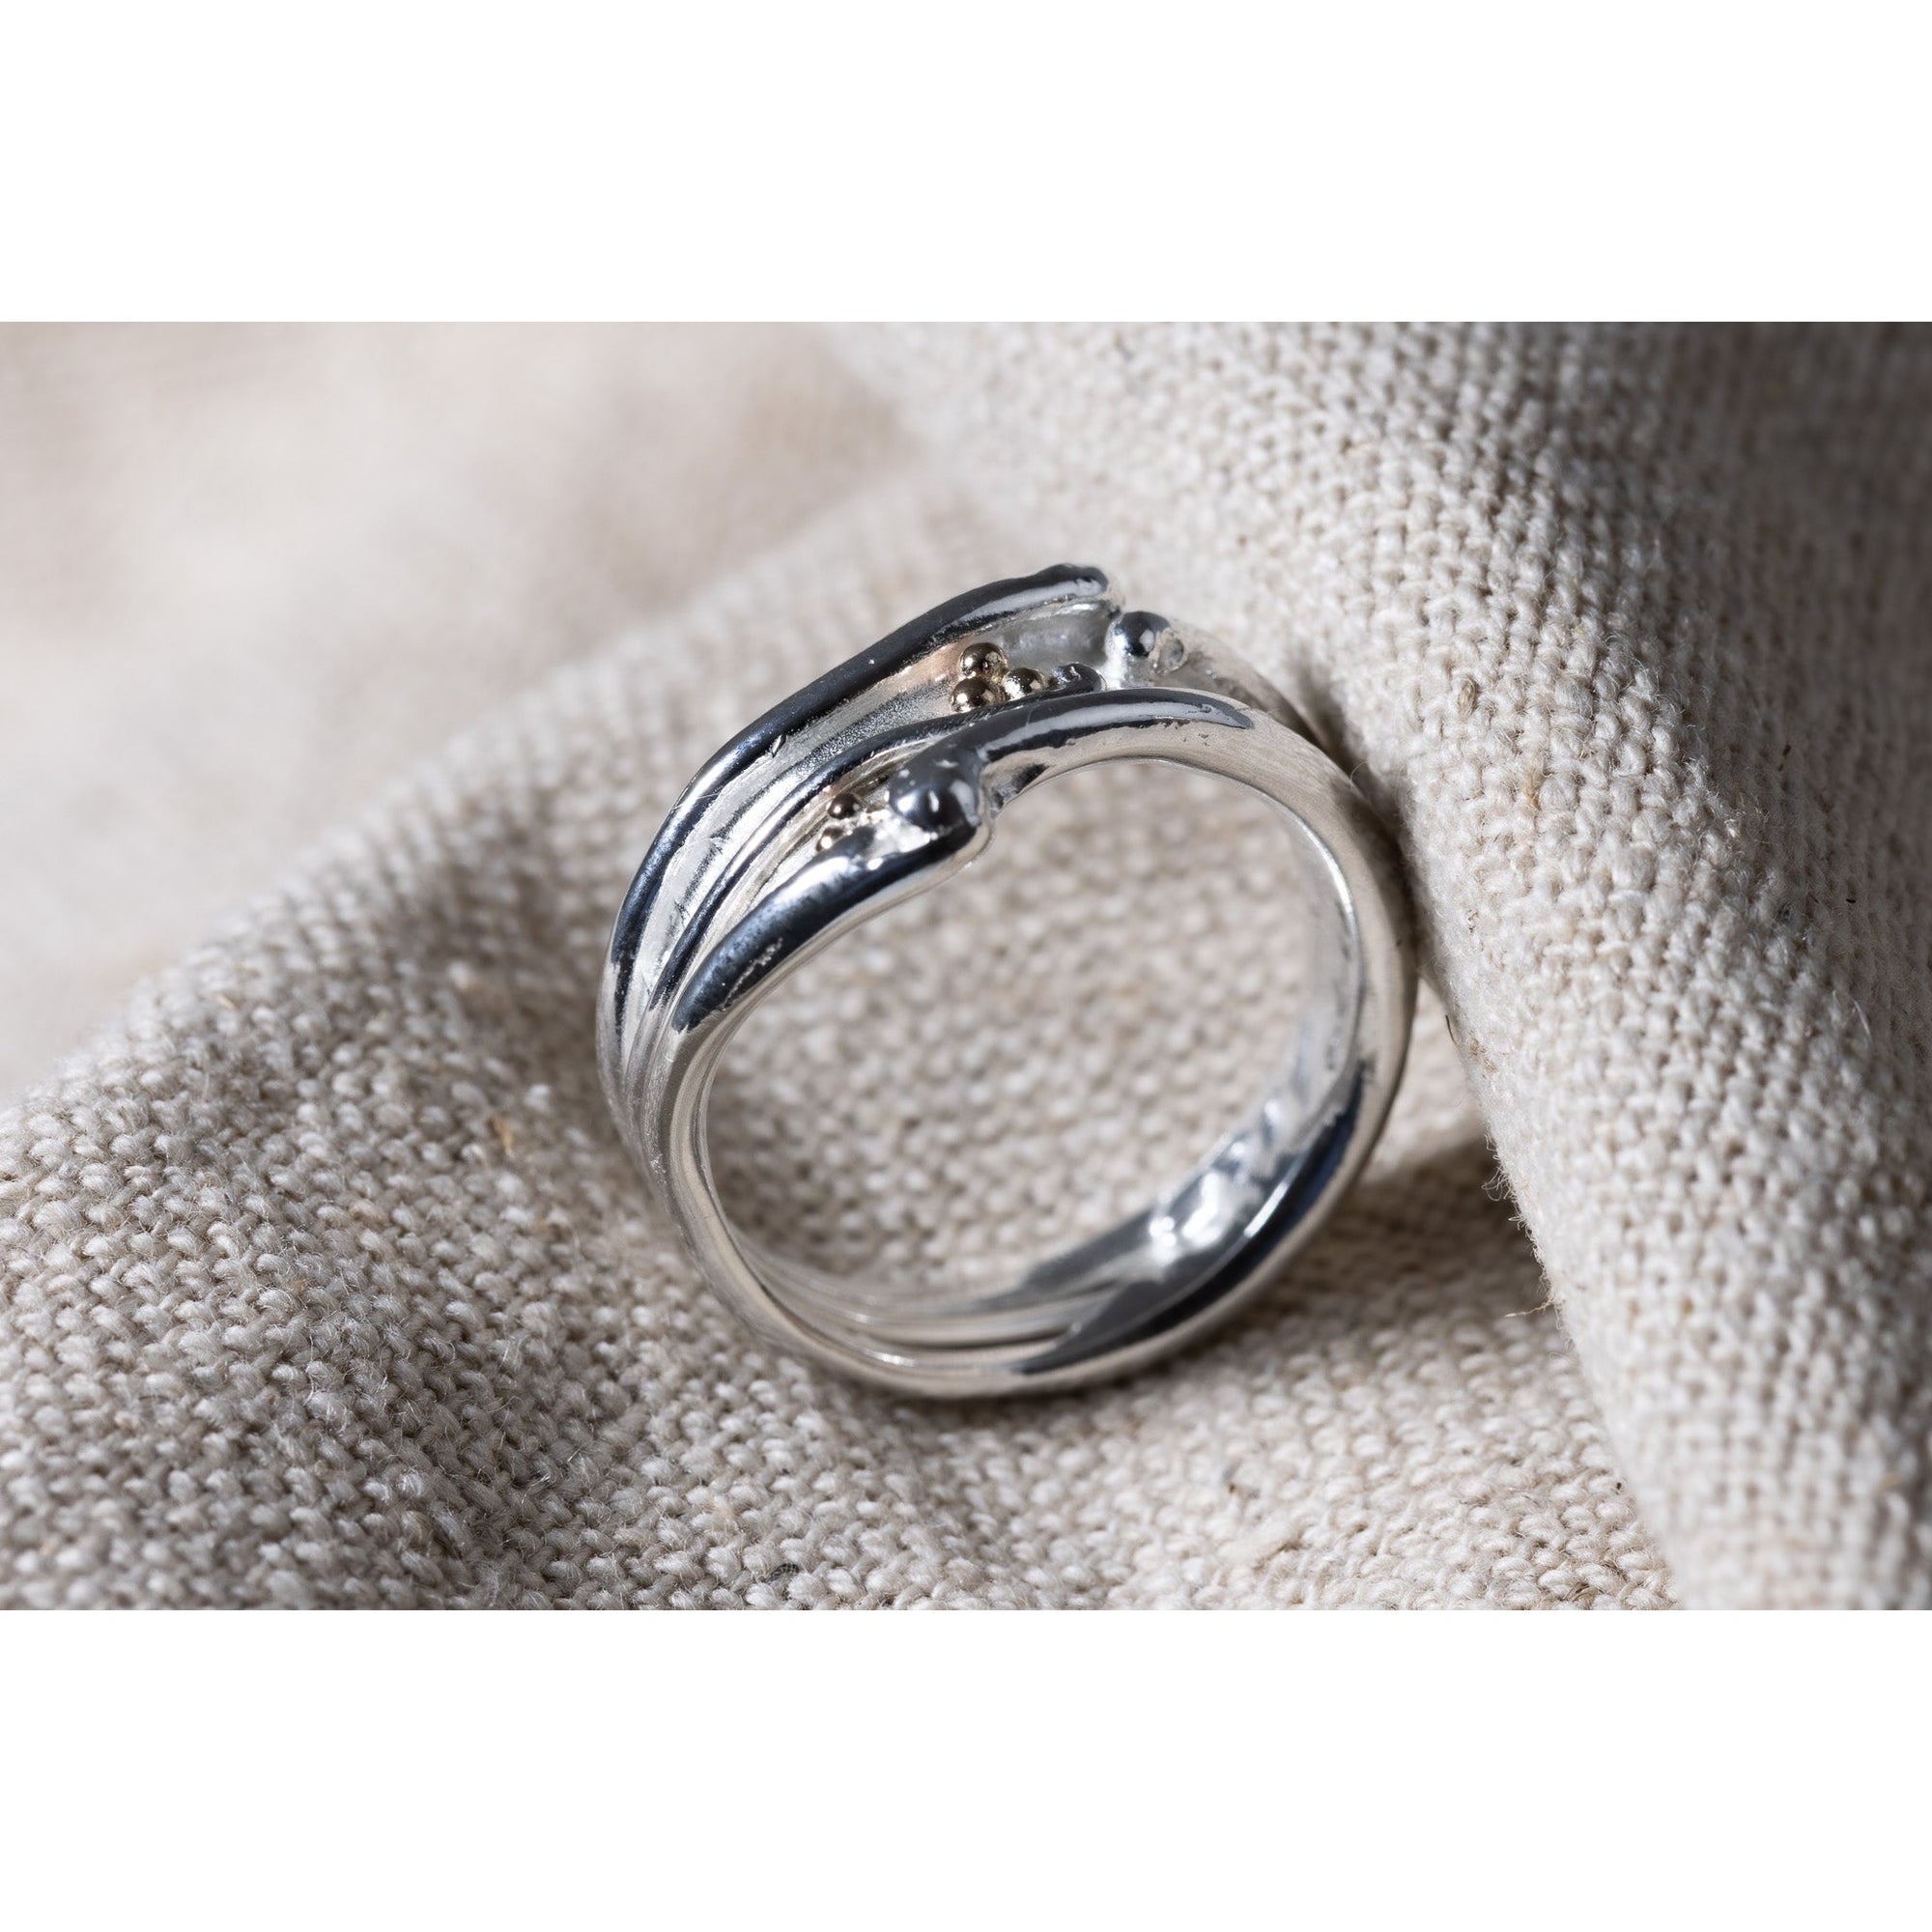 'LG04 Silver & 9ct Gold Ring' by Les Grimshaw, available at Padstow Gallery, Cornwall